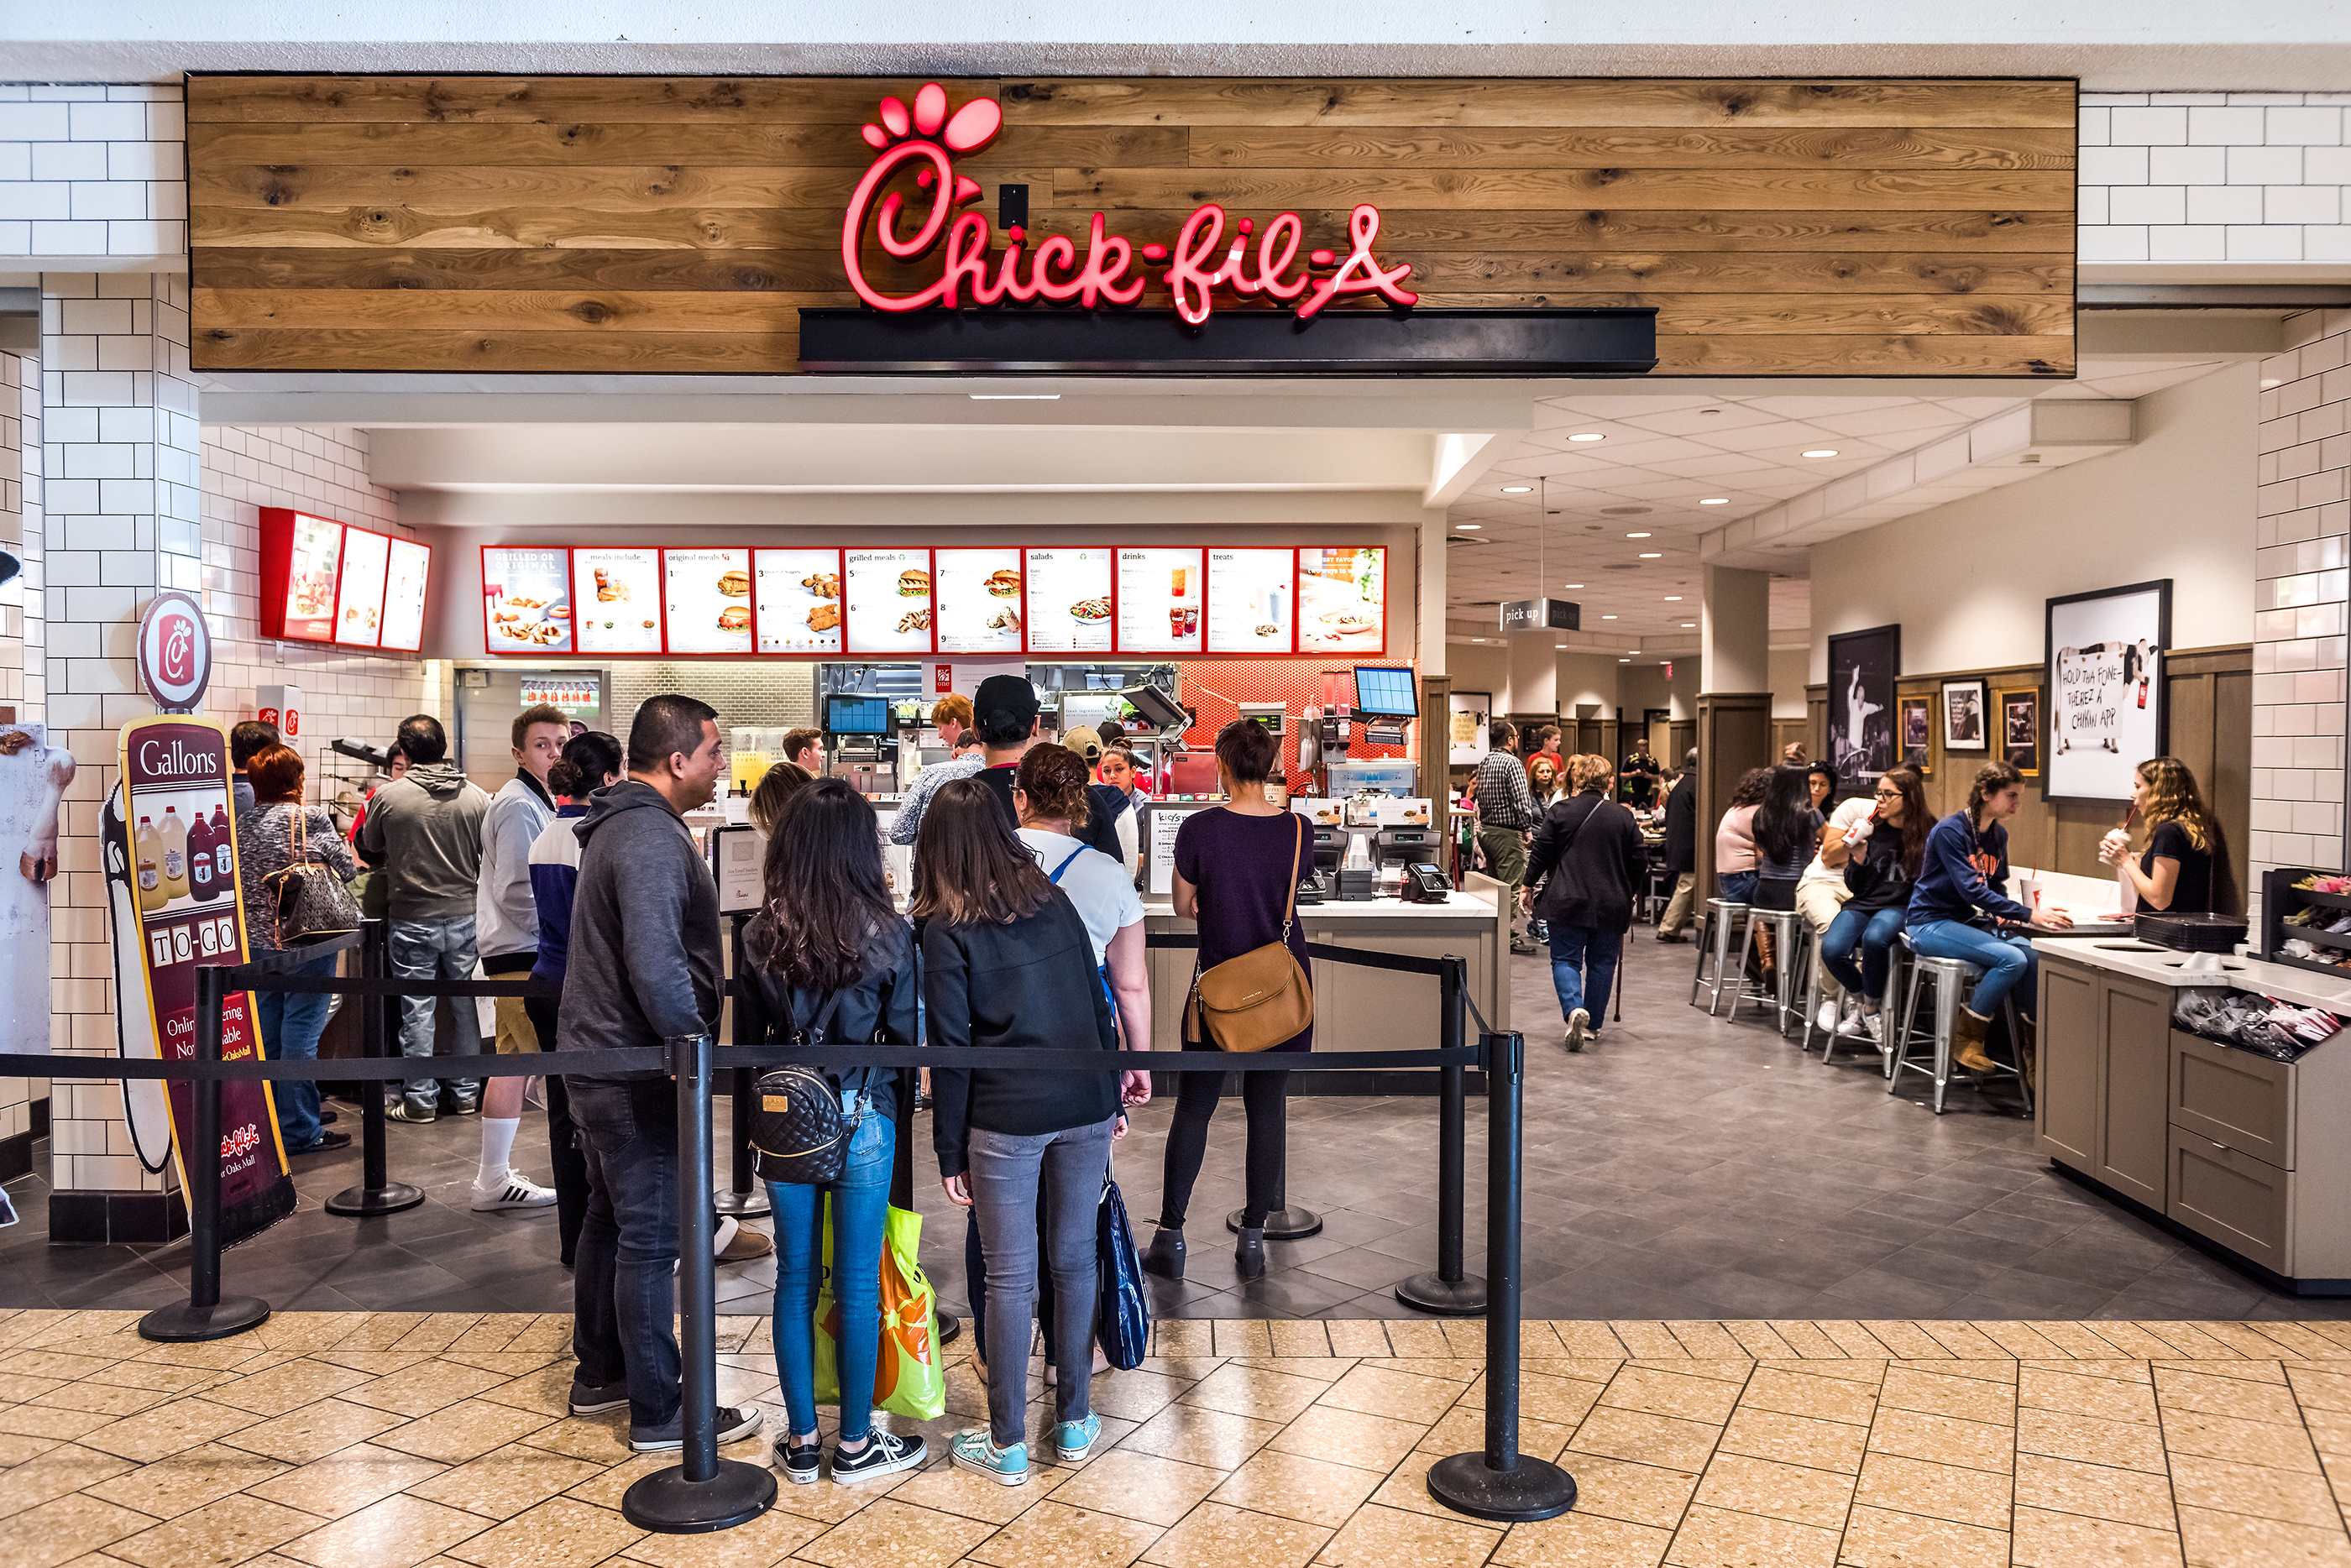 Chick-fil-a store with people in line waiting to buy food, Fairfax, Virginia, Feburary 18, 2017.